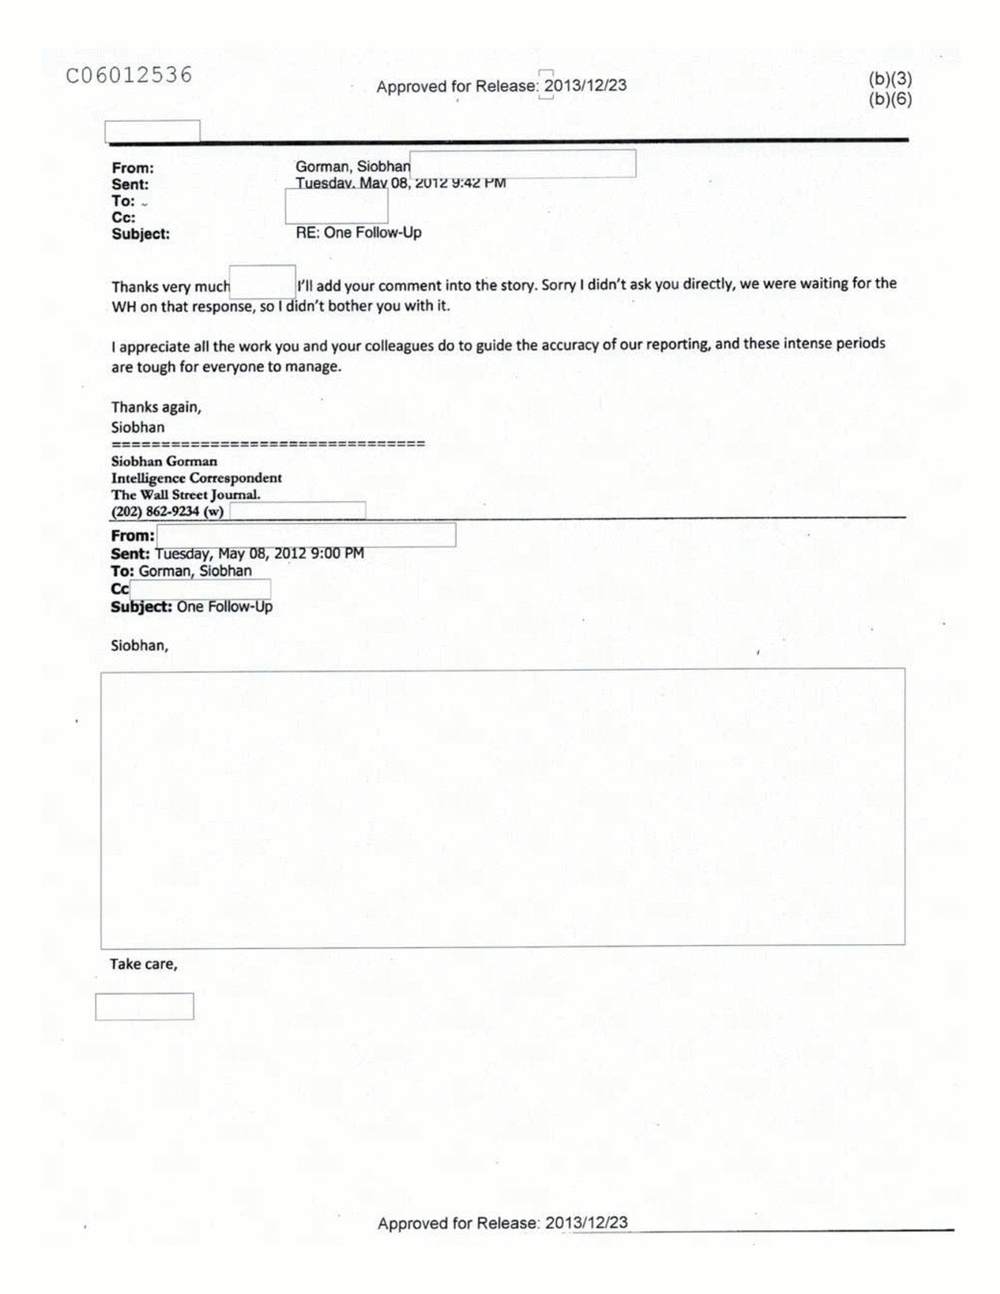 Page 69 from Email Correspondence Between Reporters and CIA Flacks